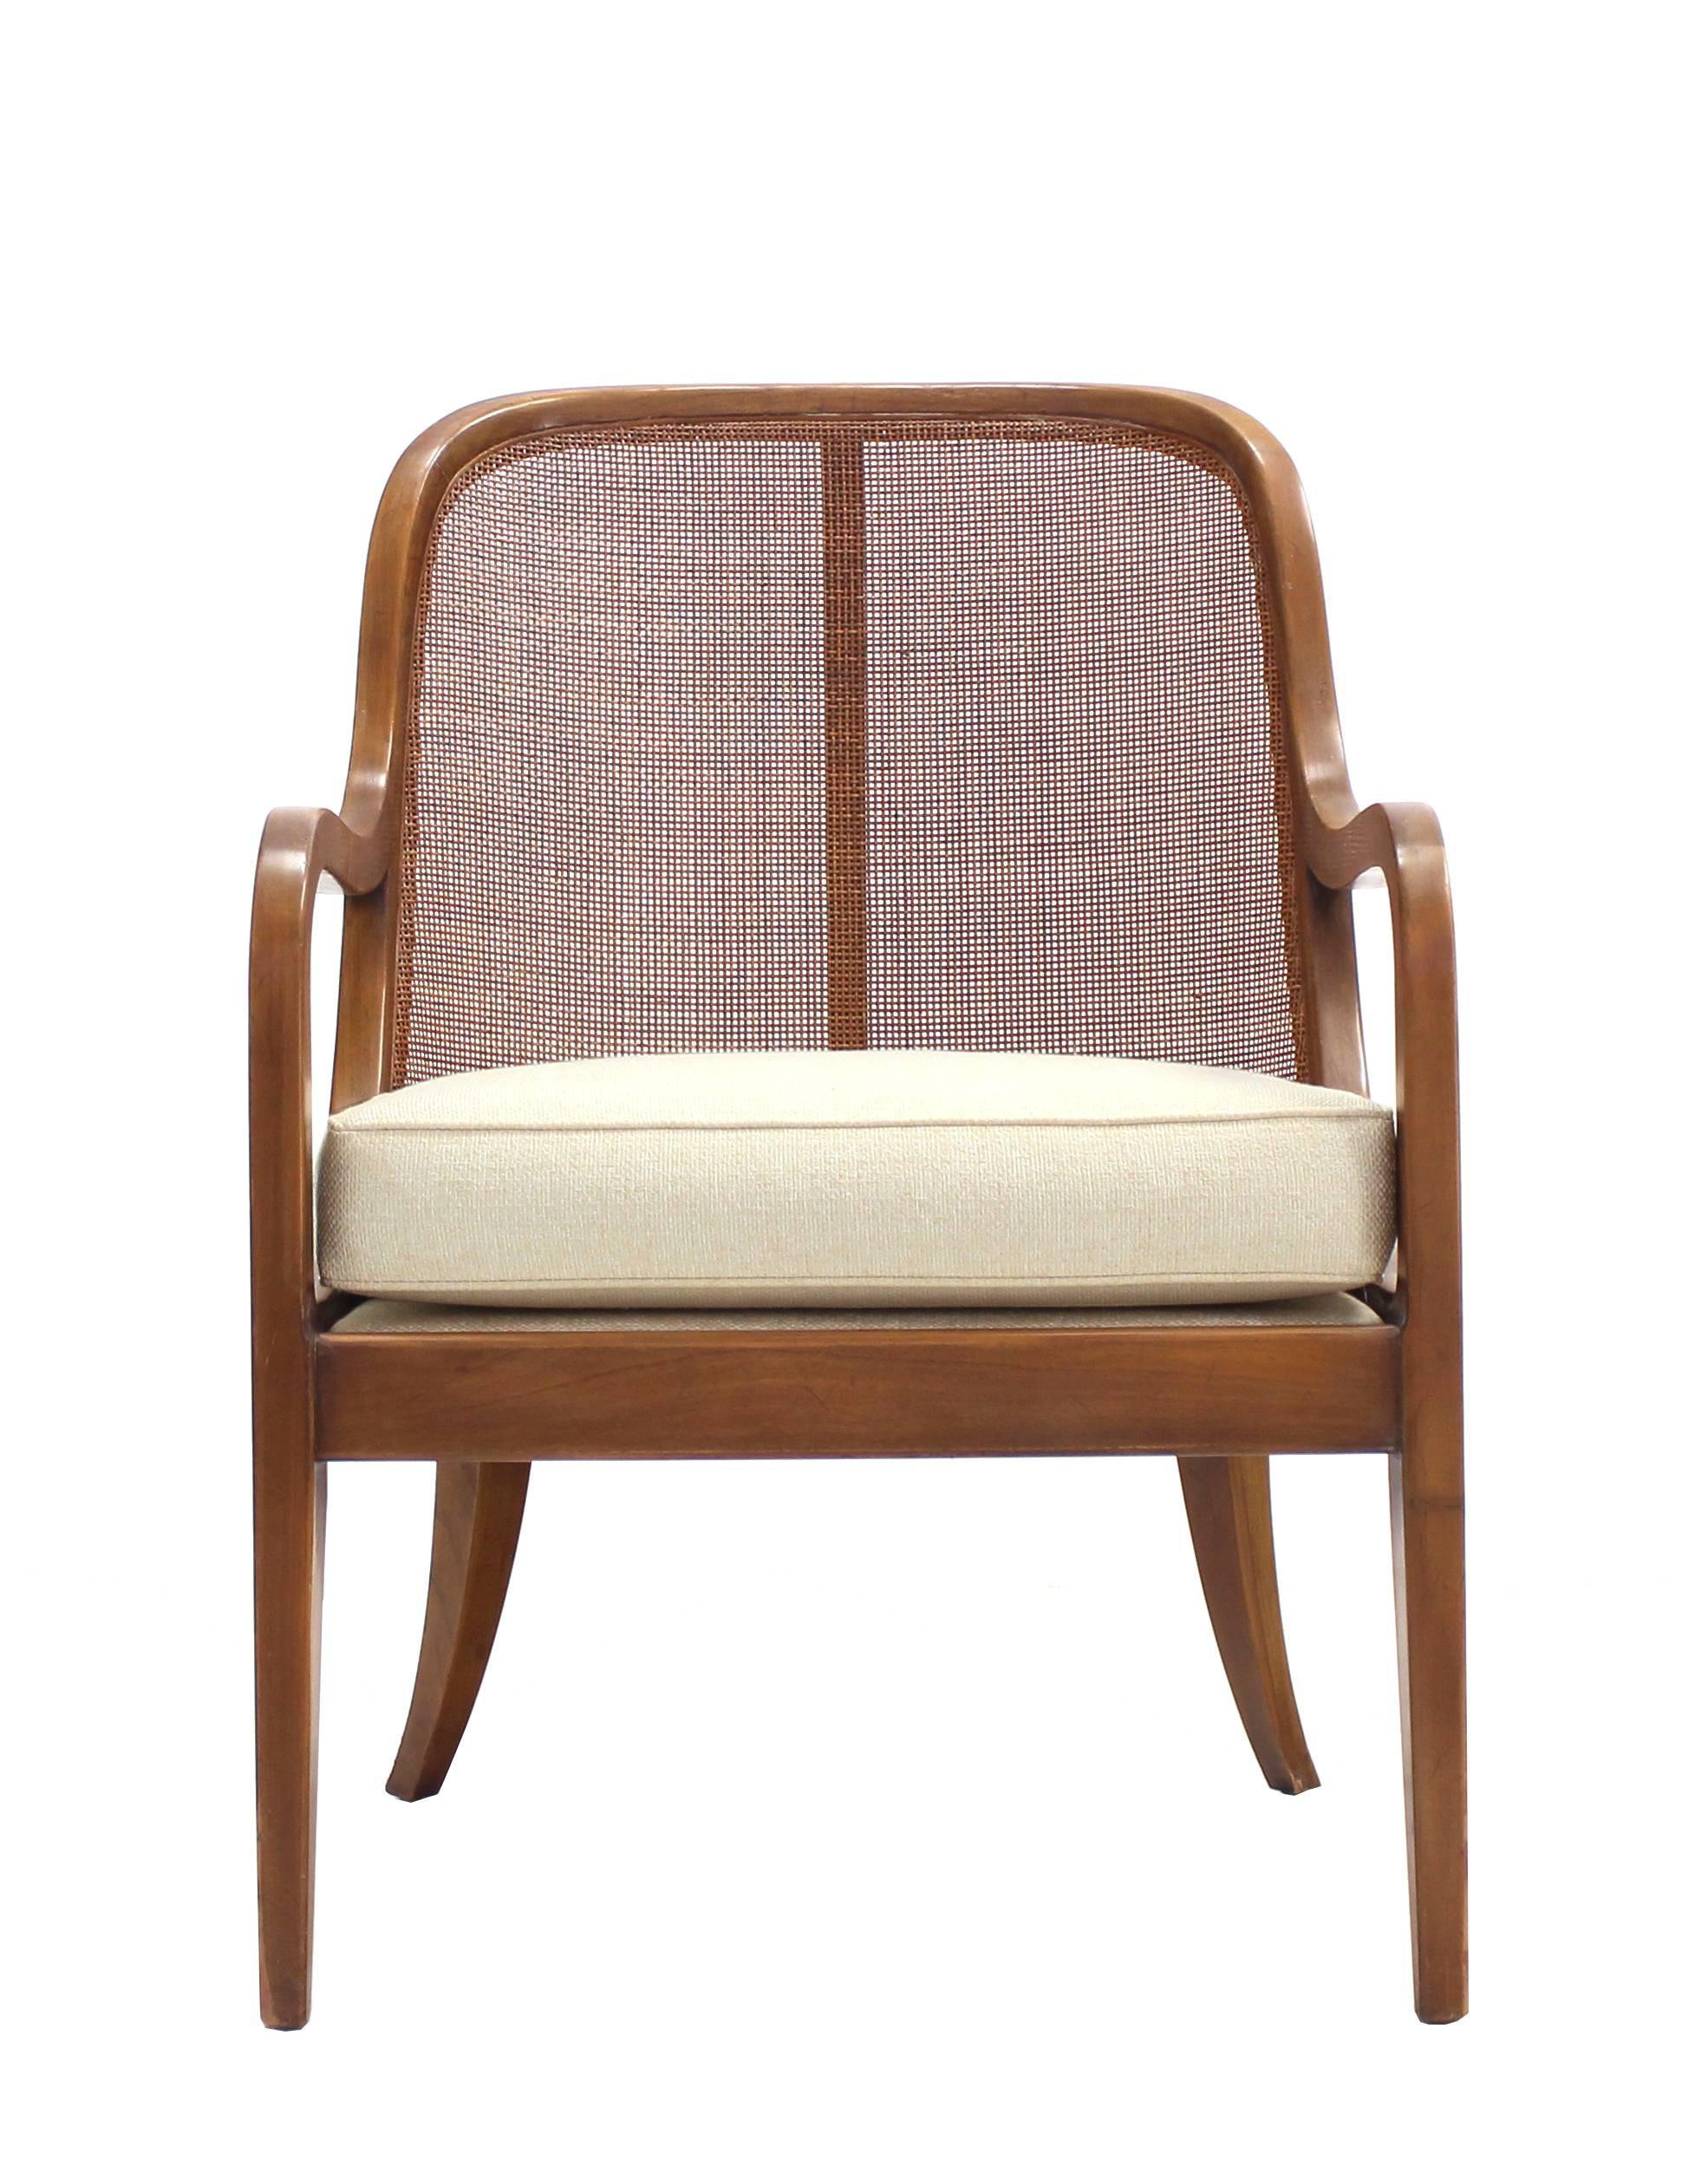 American New Upholstery Barrel Back Lounge Chair